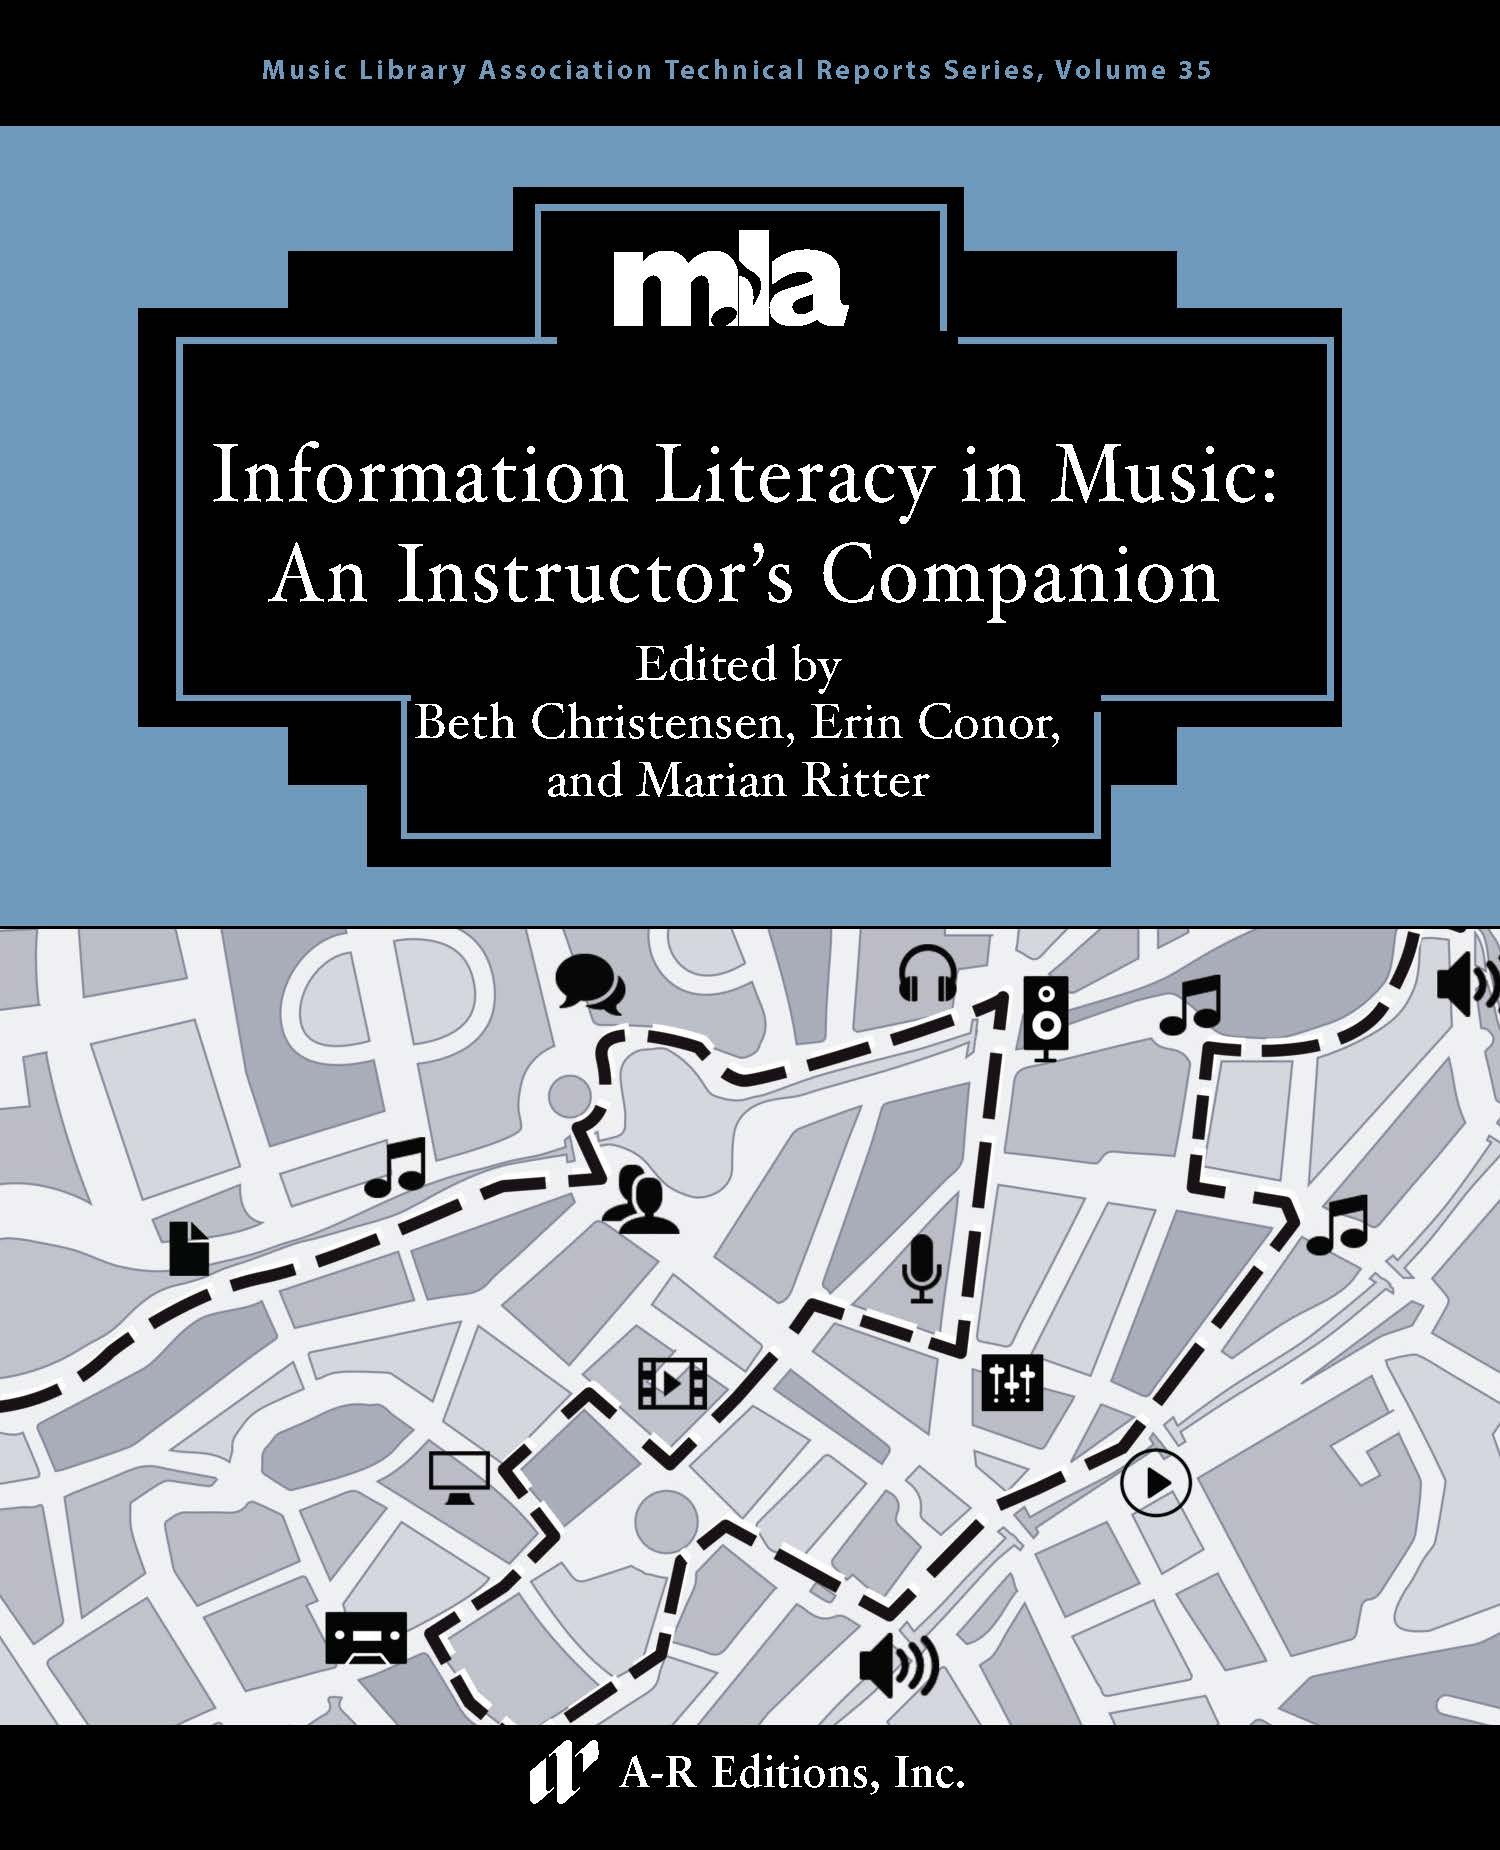 Information Literacy in Music book cover